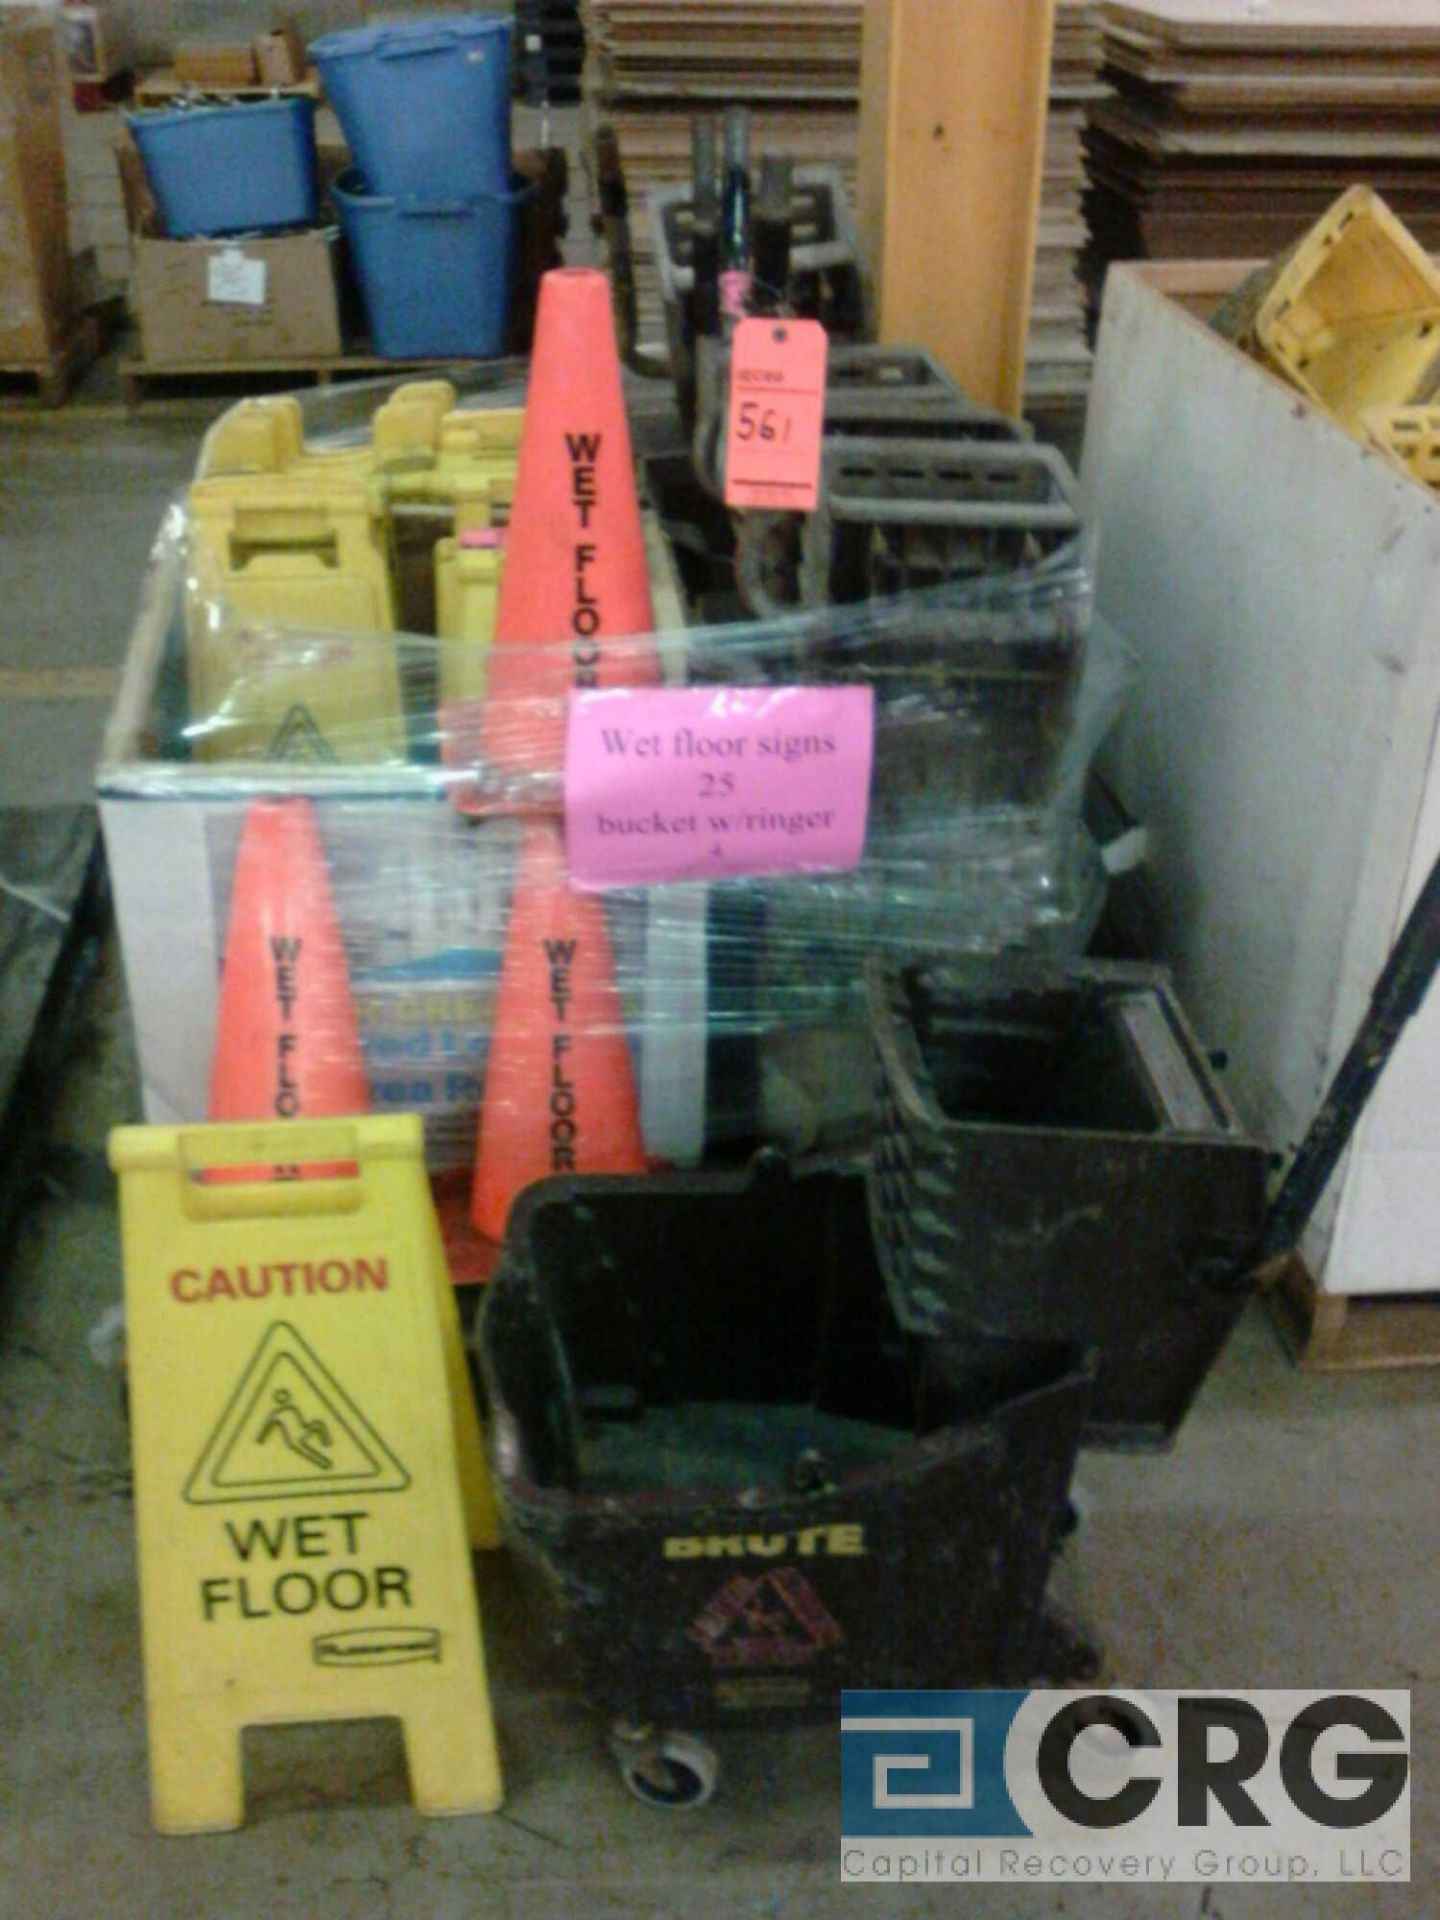 Lot of (25) wet floor signs, and (4) mop buckets w/ringers